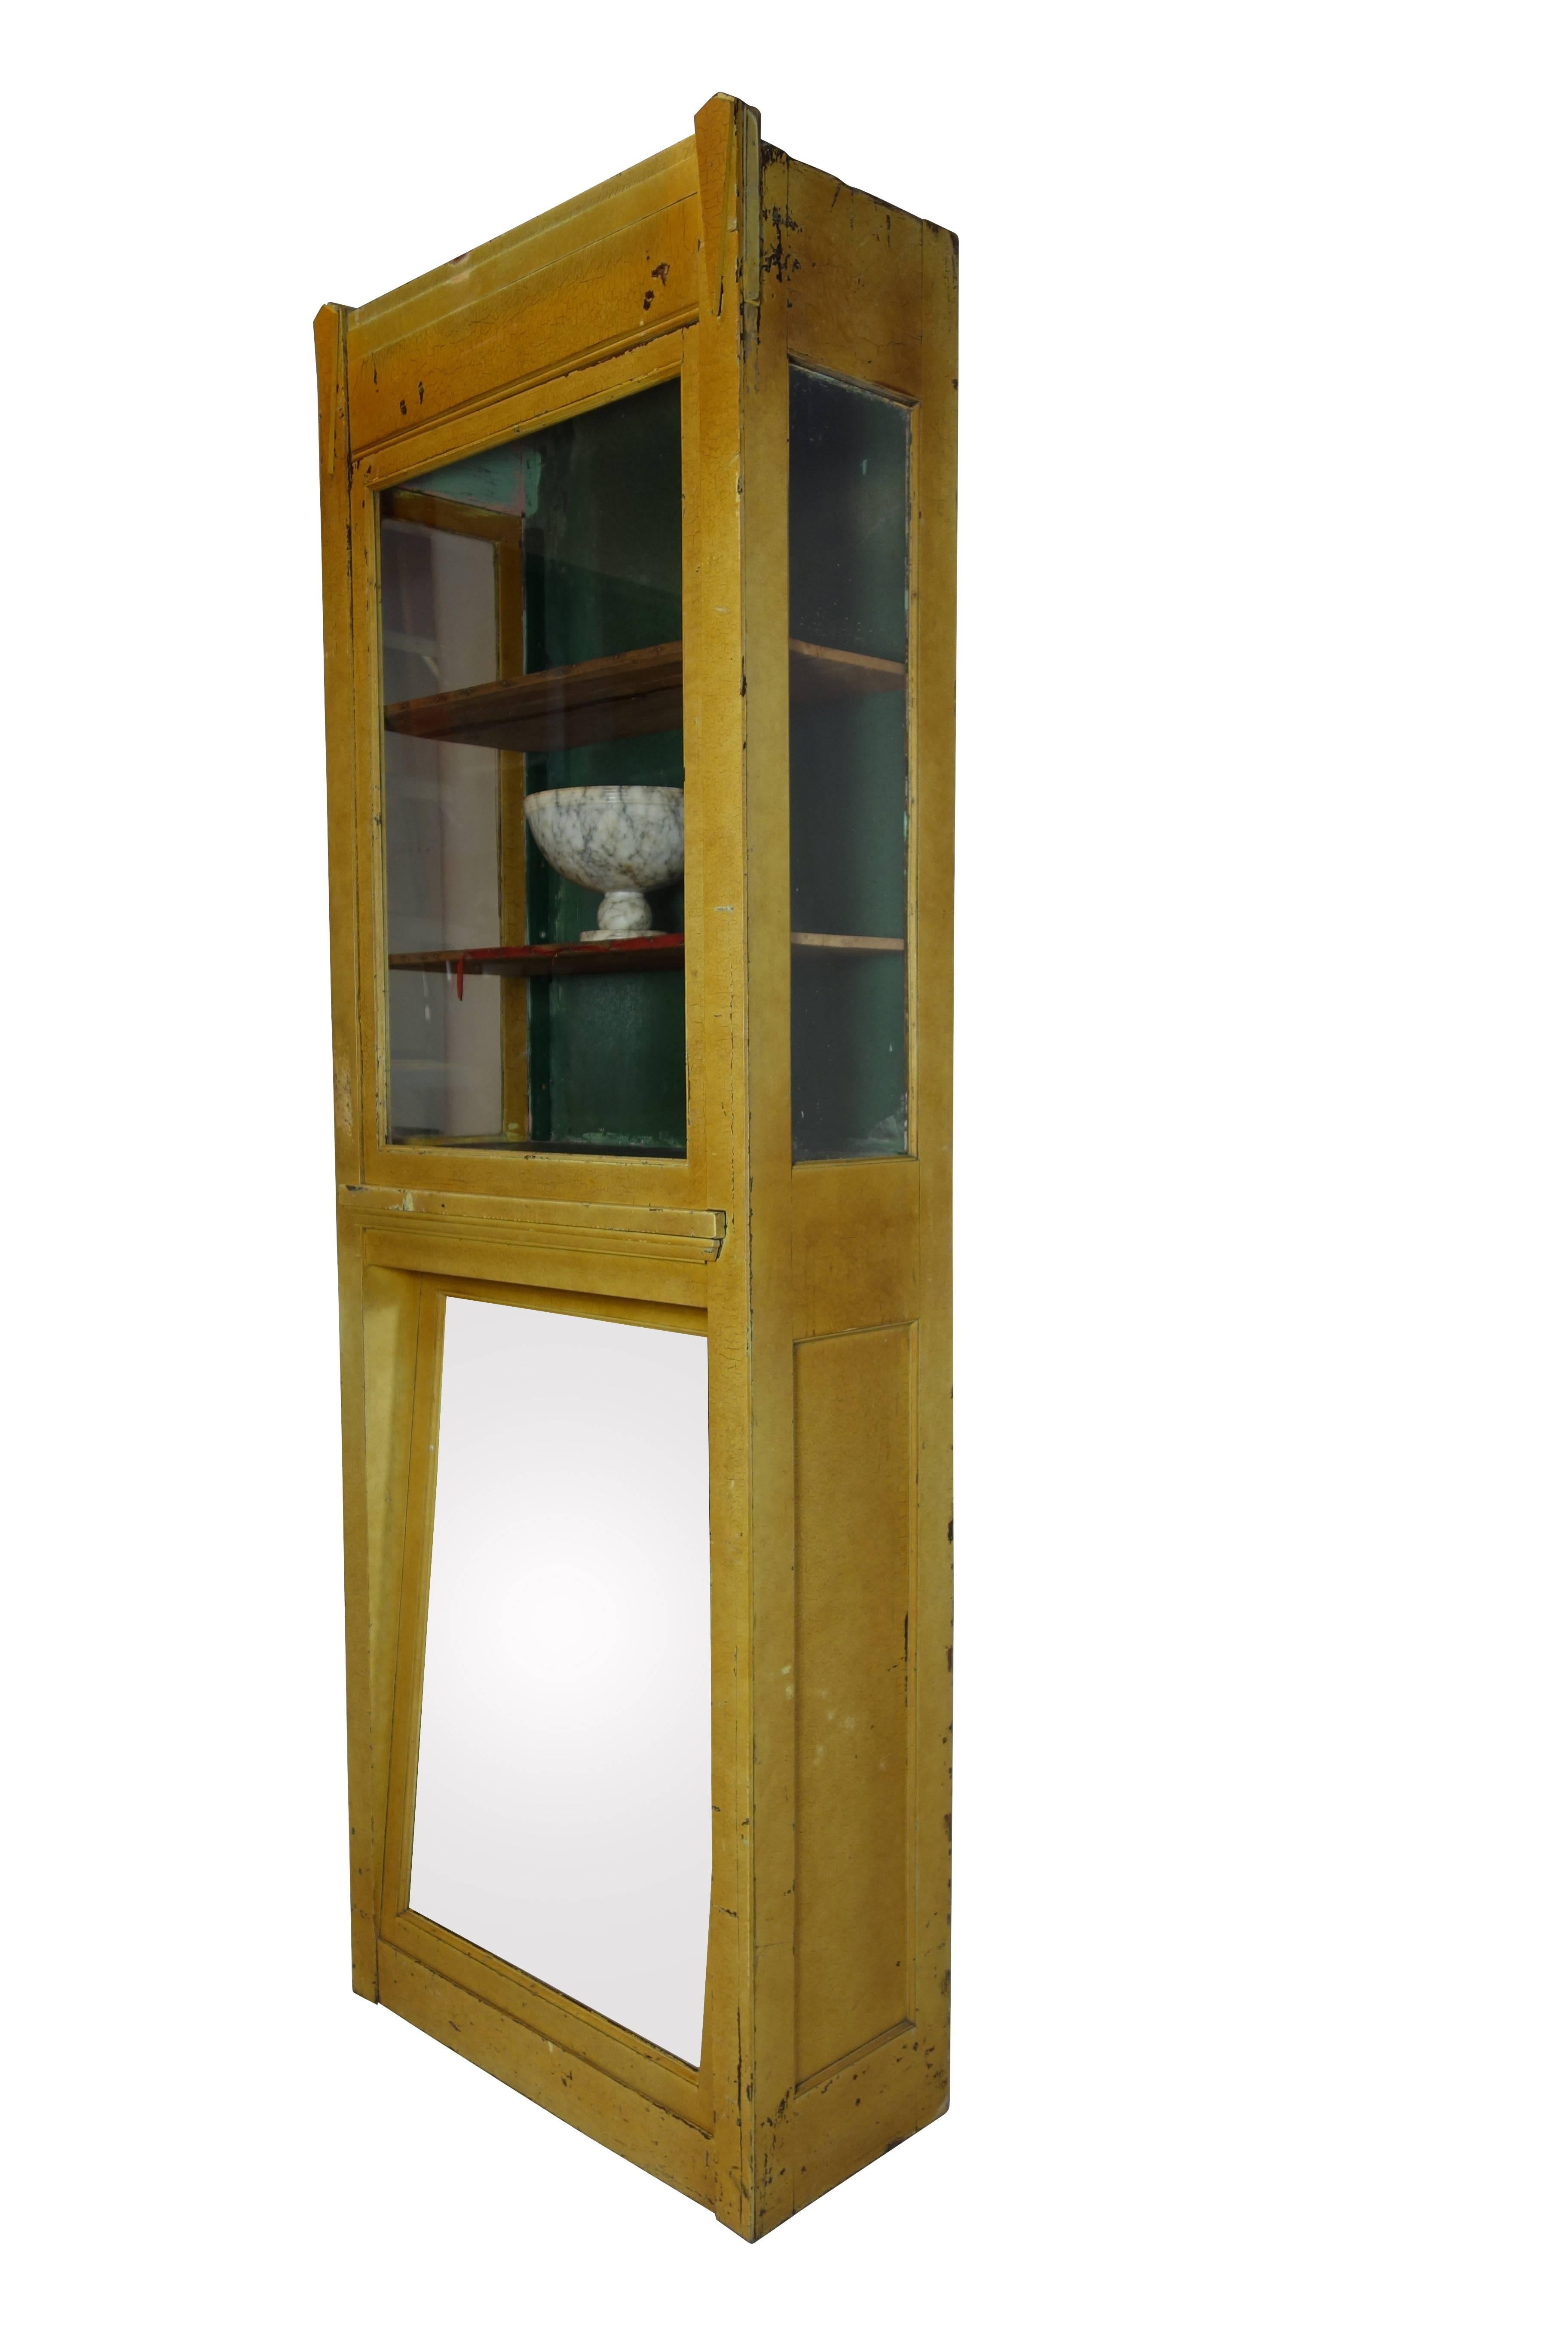 This is an Art Deco boot display case in its original paint from a department store in the Midwest. The upper display portion of the case is lighted, illuminating the objects placed inside. The mirror on the bottom of the cabinet is angled so the